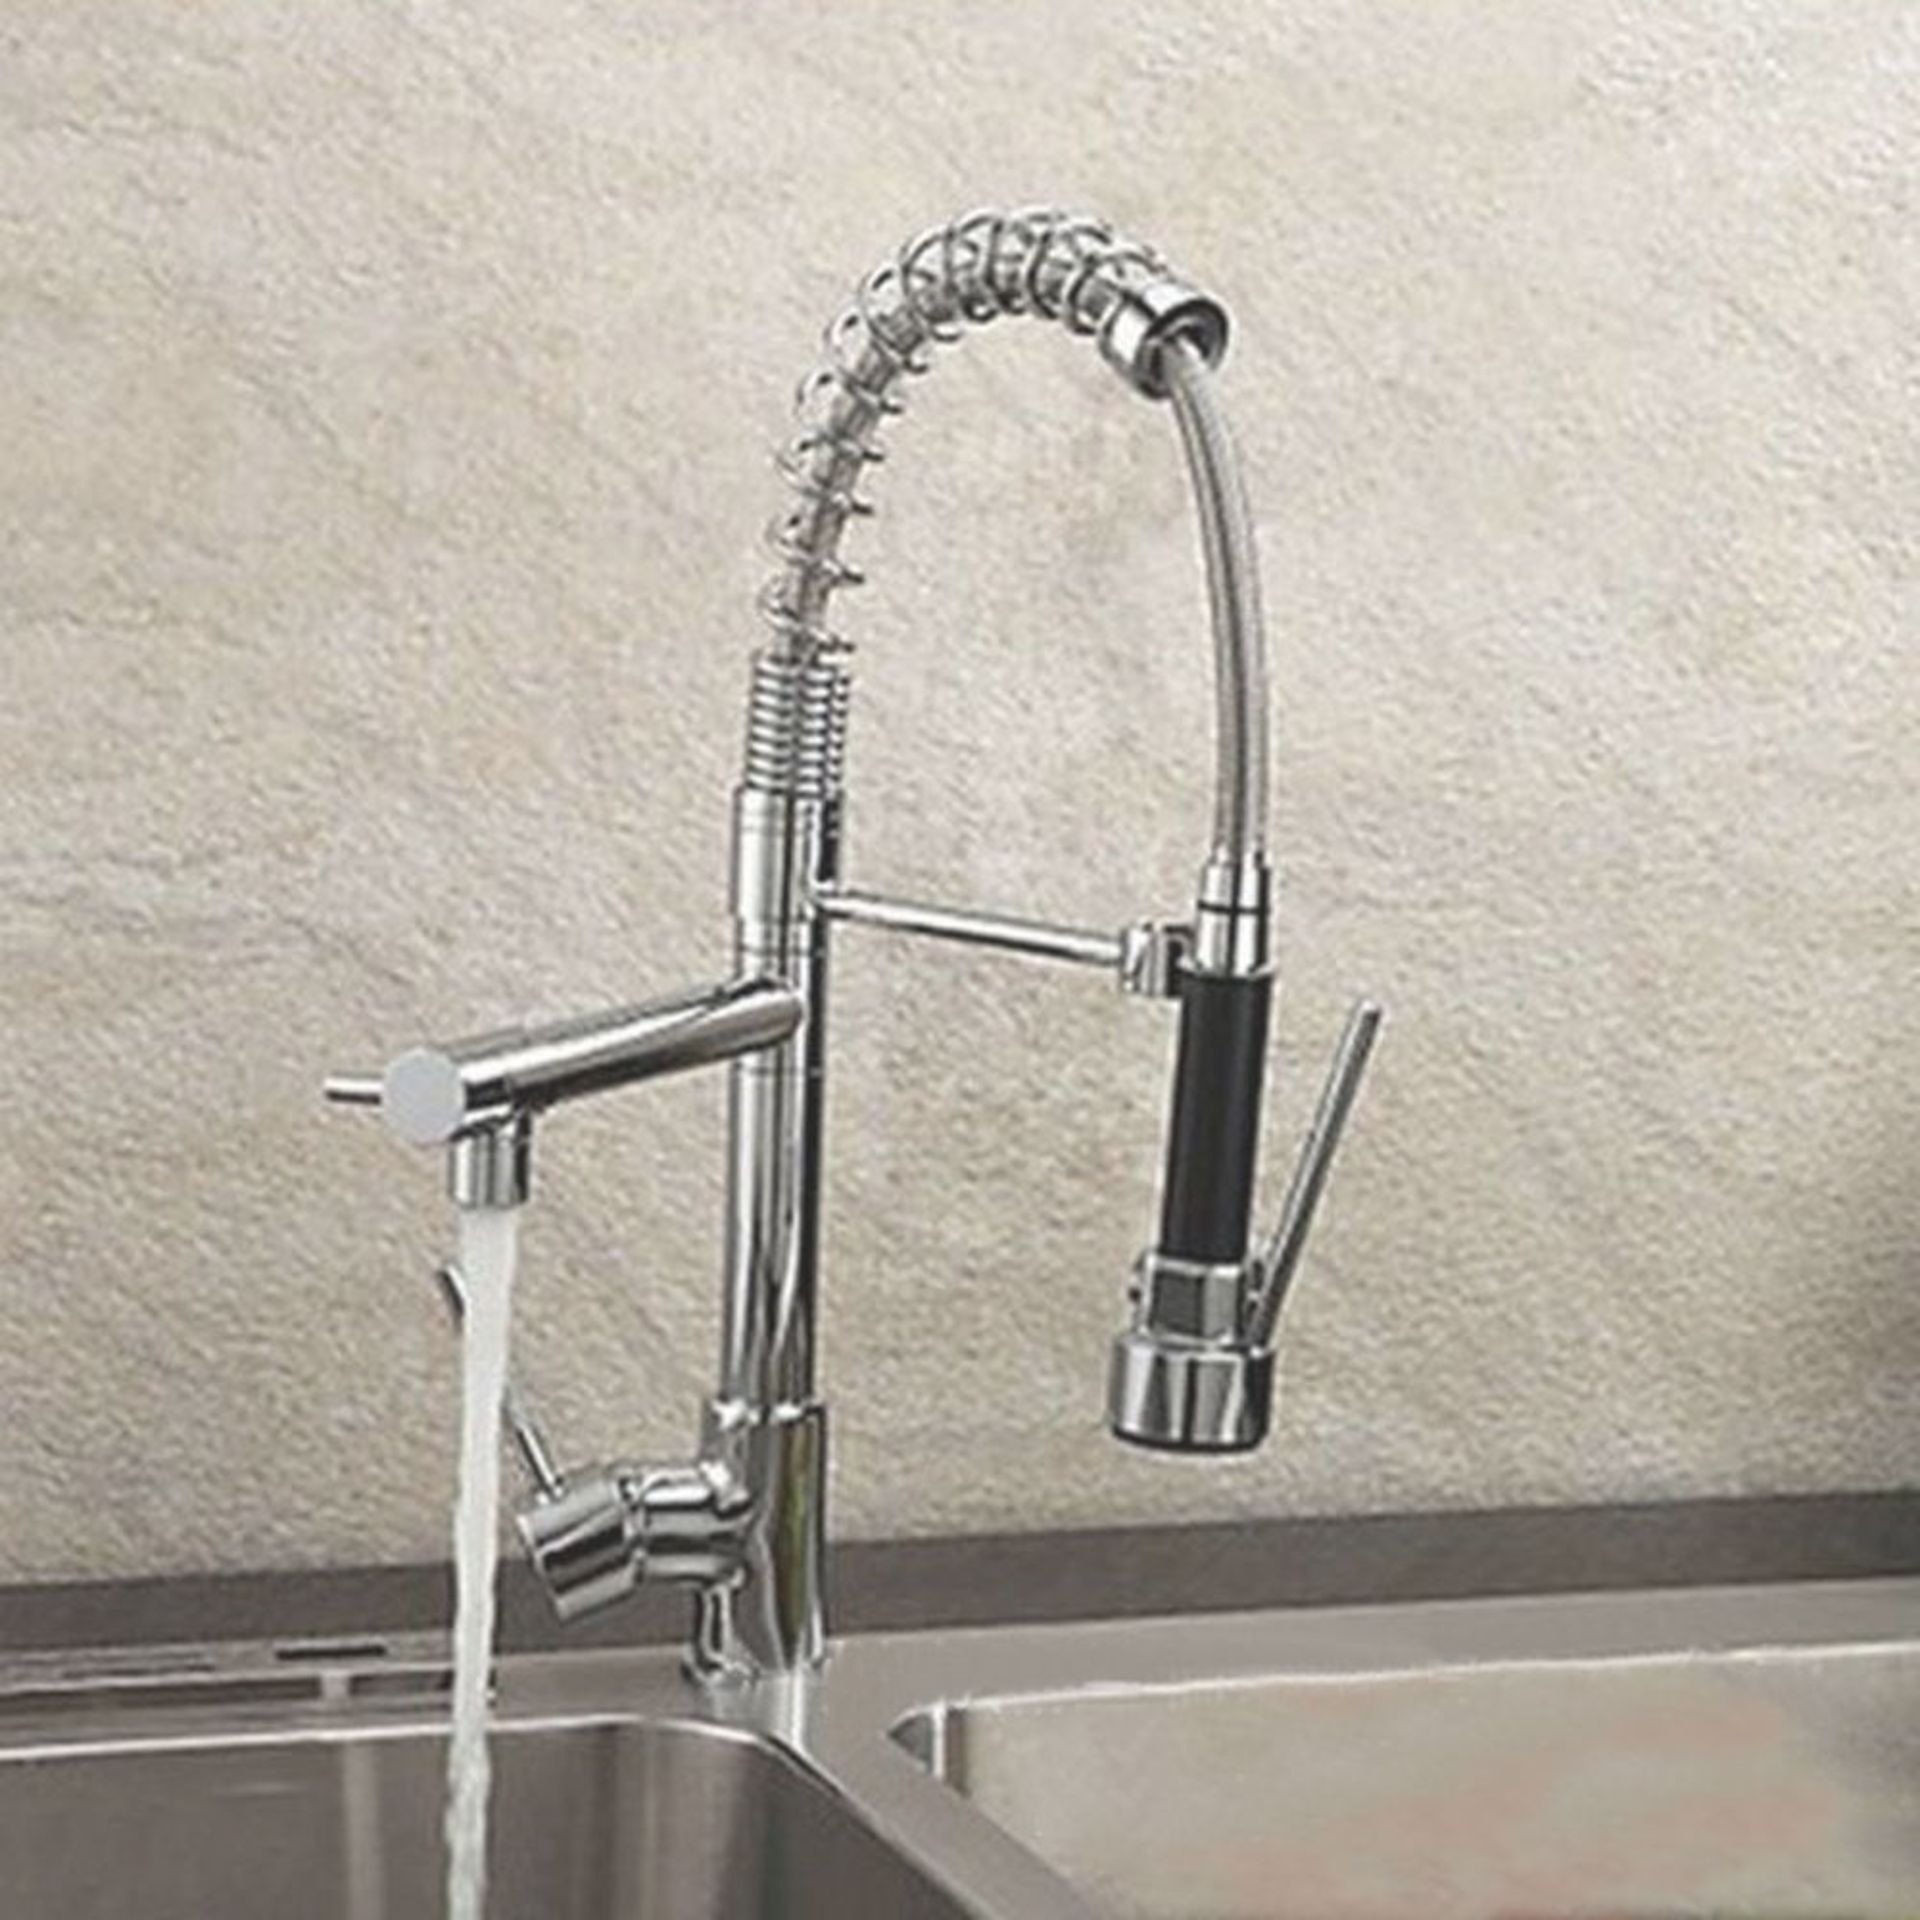 Bentley Modern Monobloc Chrome Brass Pull Out Spray Mixer Tap.RRP £349.99.This tap is from our... - Image 3 of 3